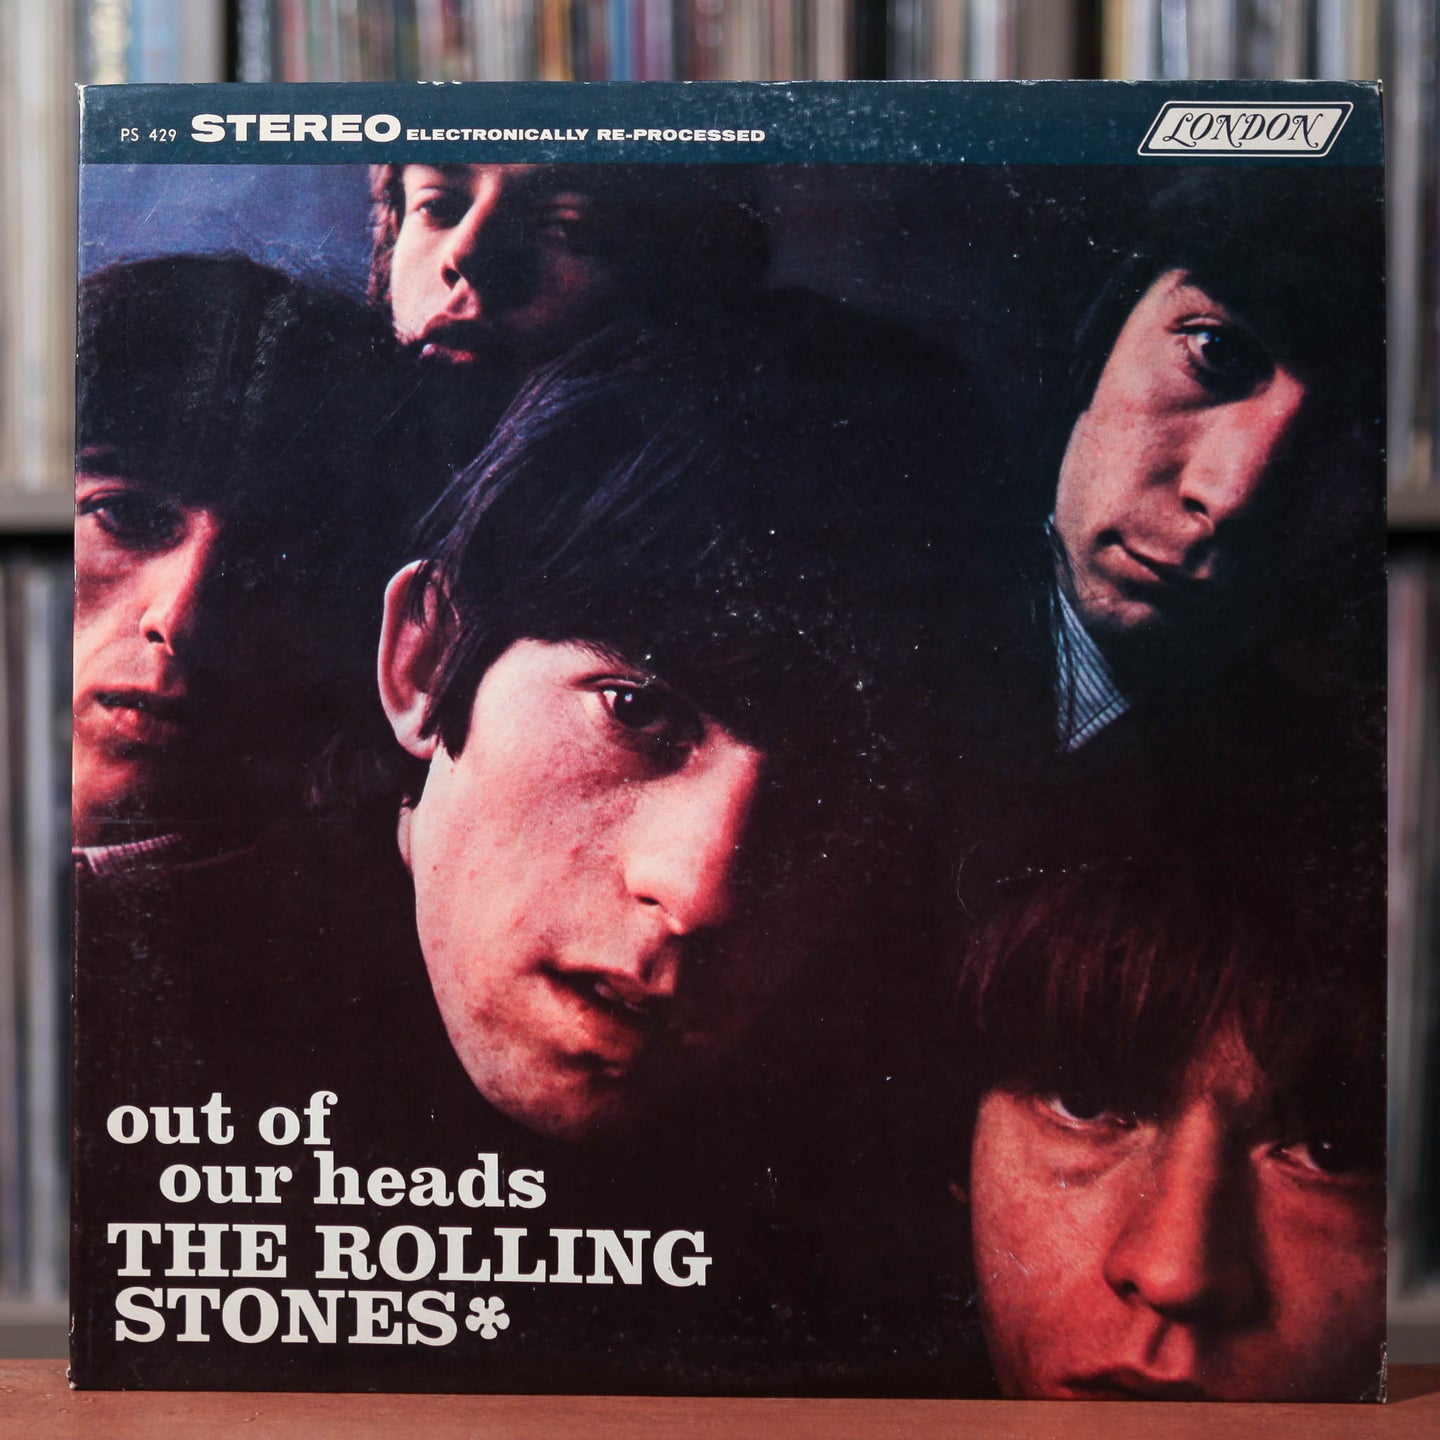 Rolling Stones - Out Of Our Heads - 1960's  London, VG+/VG+